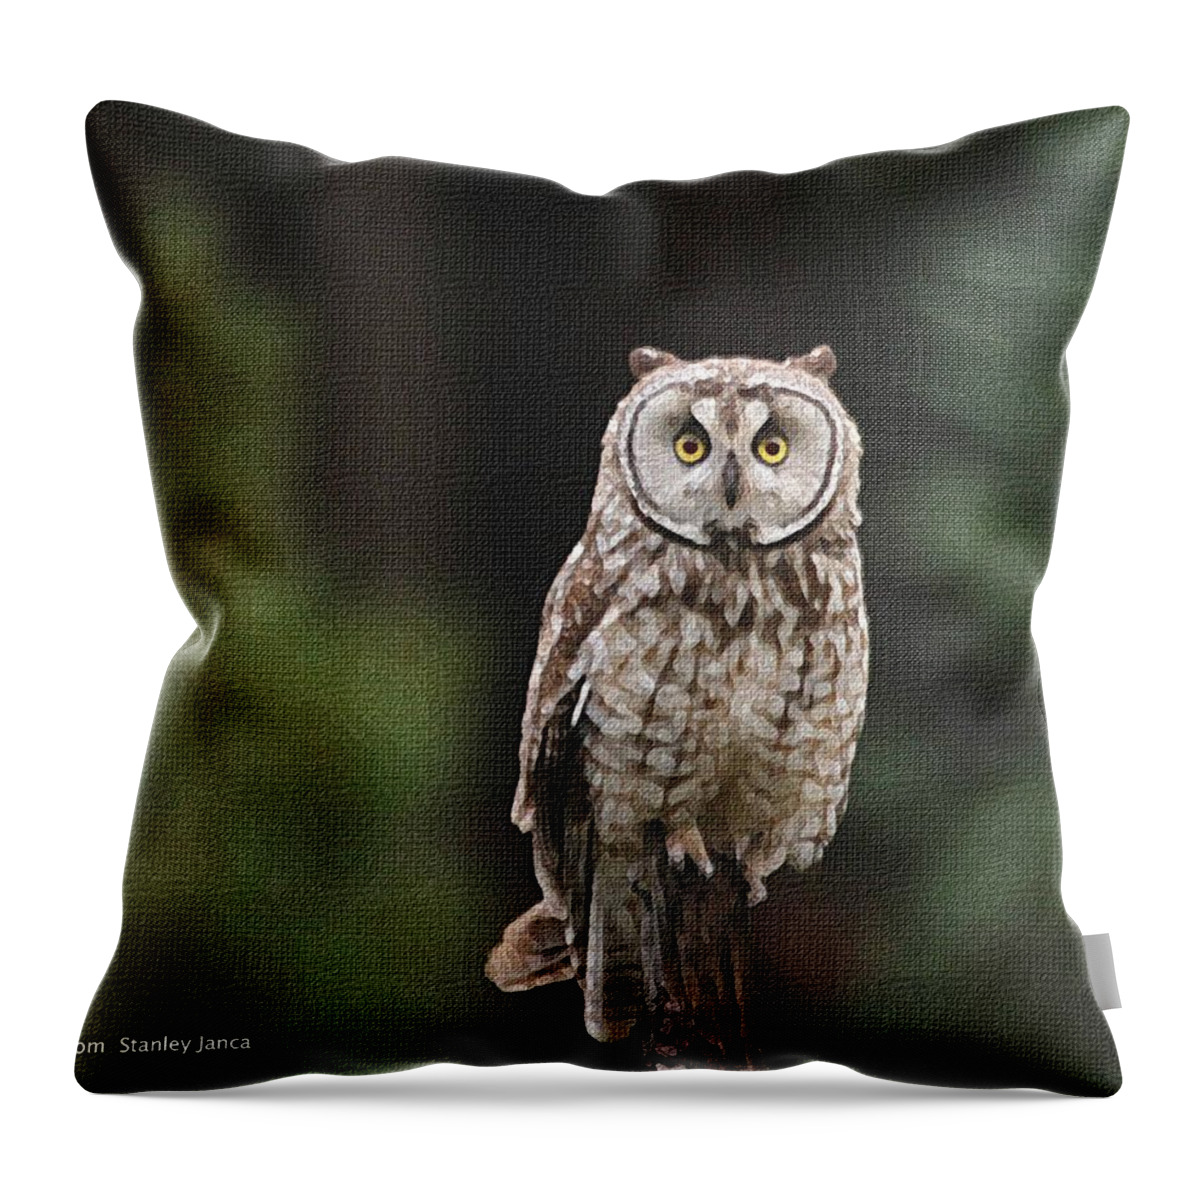 Owl Throw Pillow featuring the photograph Owl In The Forest Visits by Tom Janca